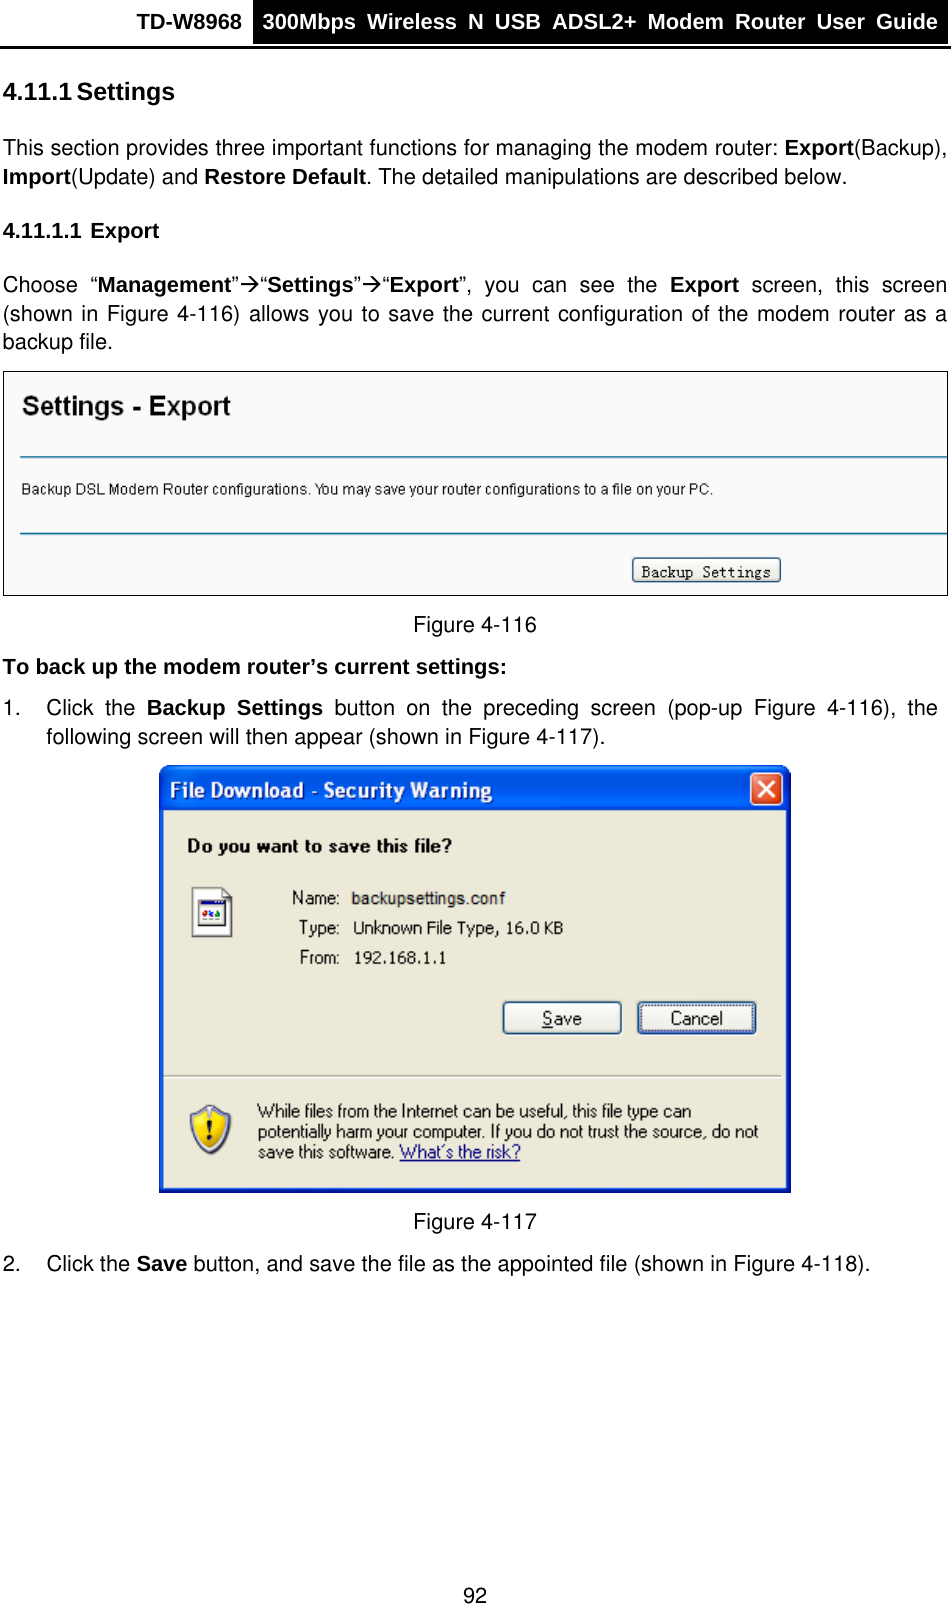 TD-W8968  300Mbps Wireless N USB ADSL2+ Modem Router User Guide  4.11.1 Settings This section provides three important functions for managing the modem router: Export(Backup), Import(Update) and Restore Default. The detailed manipulations are described below. 4.11.1.1 Export Choose “Management”Æ“Settings”Æ“Export”, you can see the Export screen, this screen (shown in Figure 4-116) allows you to save the current configuration of the modem router as a backup file.  Figure 4-116 To back up the modem router’s current settings: 1. Click the Backup Settings button on the preceding screen (pop-up Figure 4-116), the following screen will then appear (shown in Figure 4-117).  Figure 4-117 2. Click the Save button, and save the file as the appointed file (shown in Figure 4-118). 92 